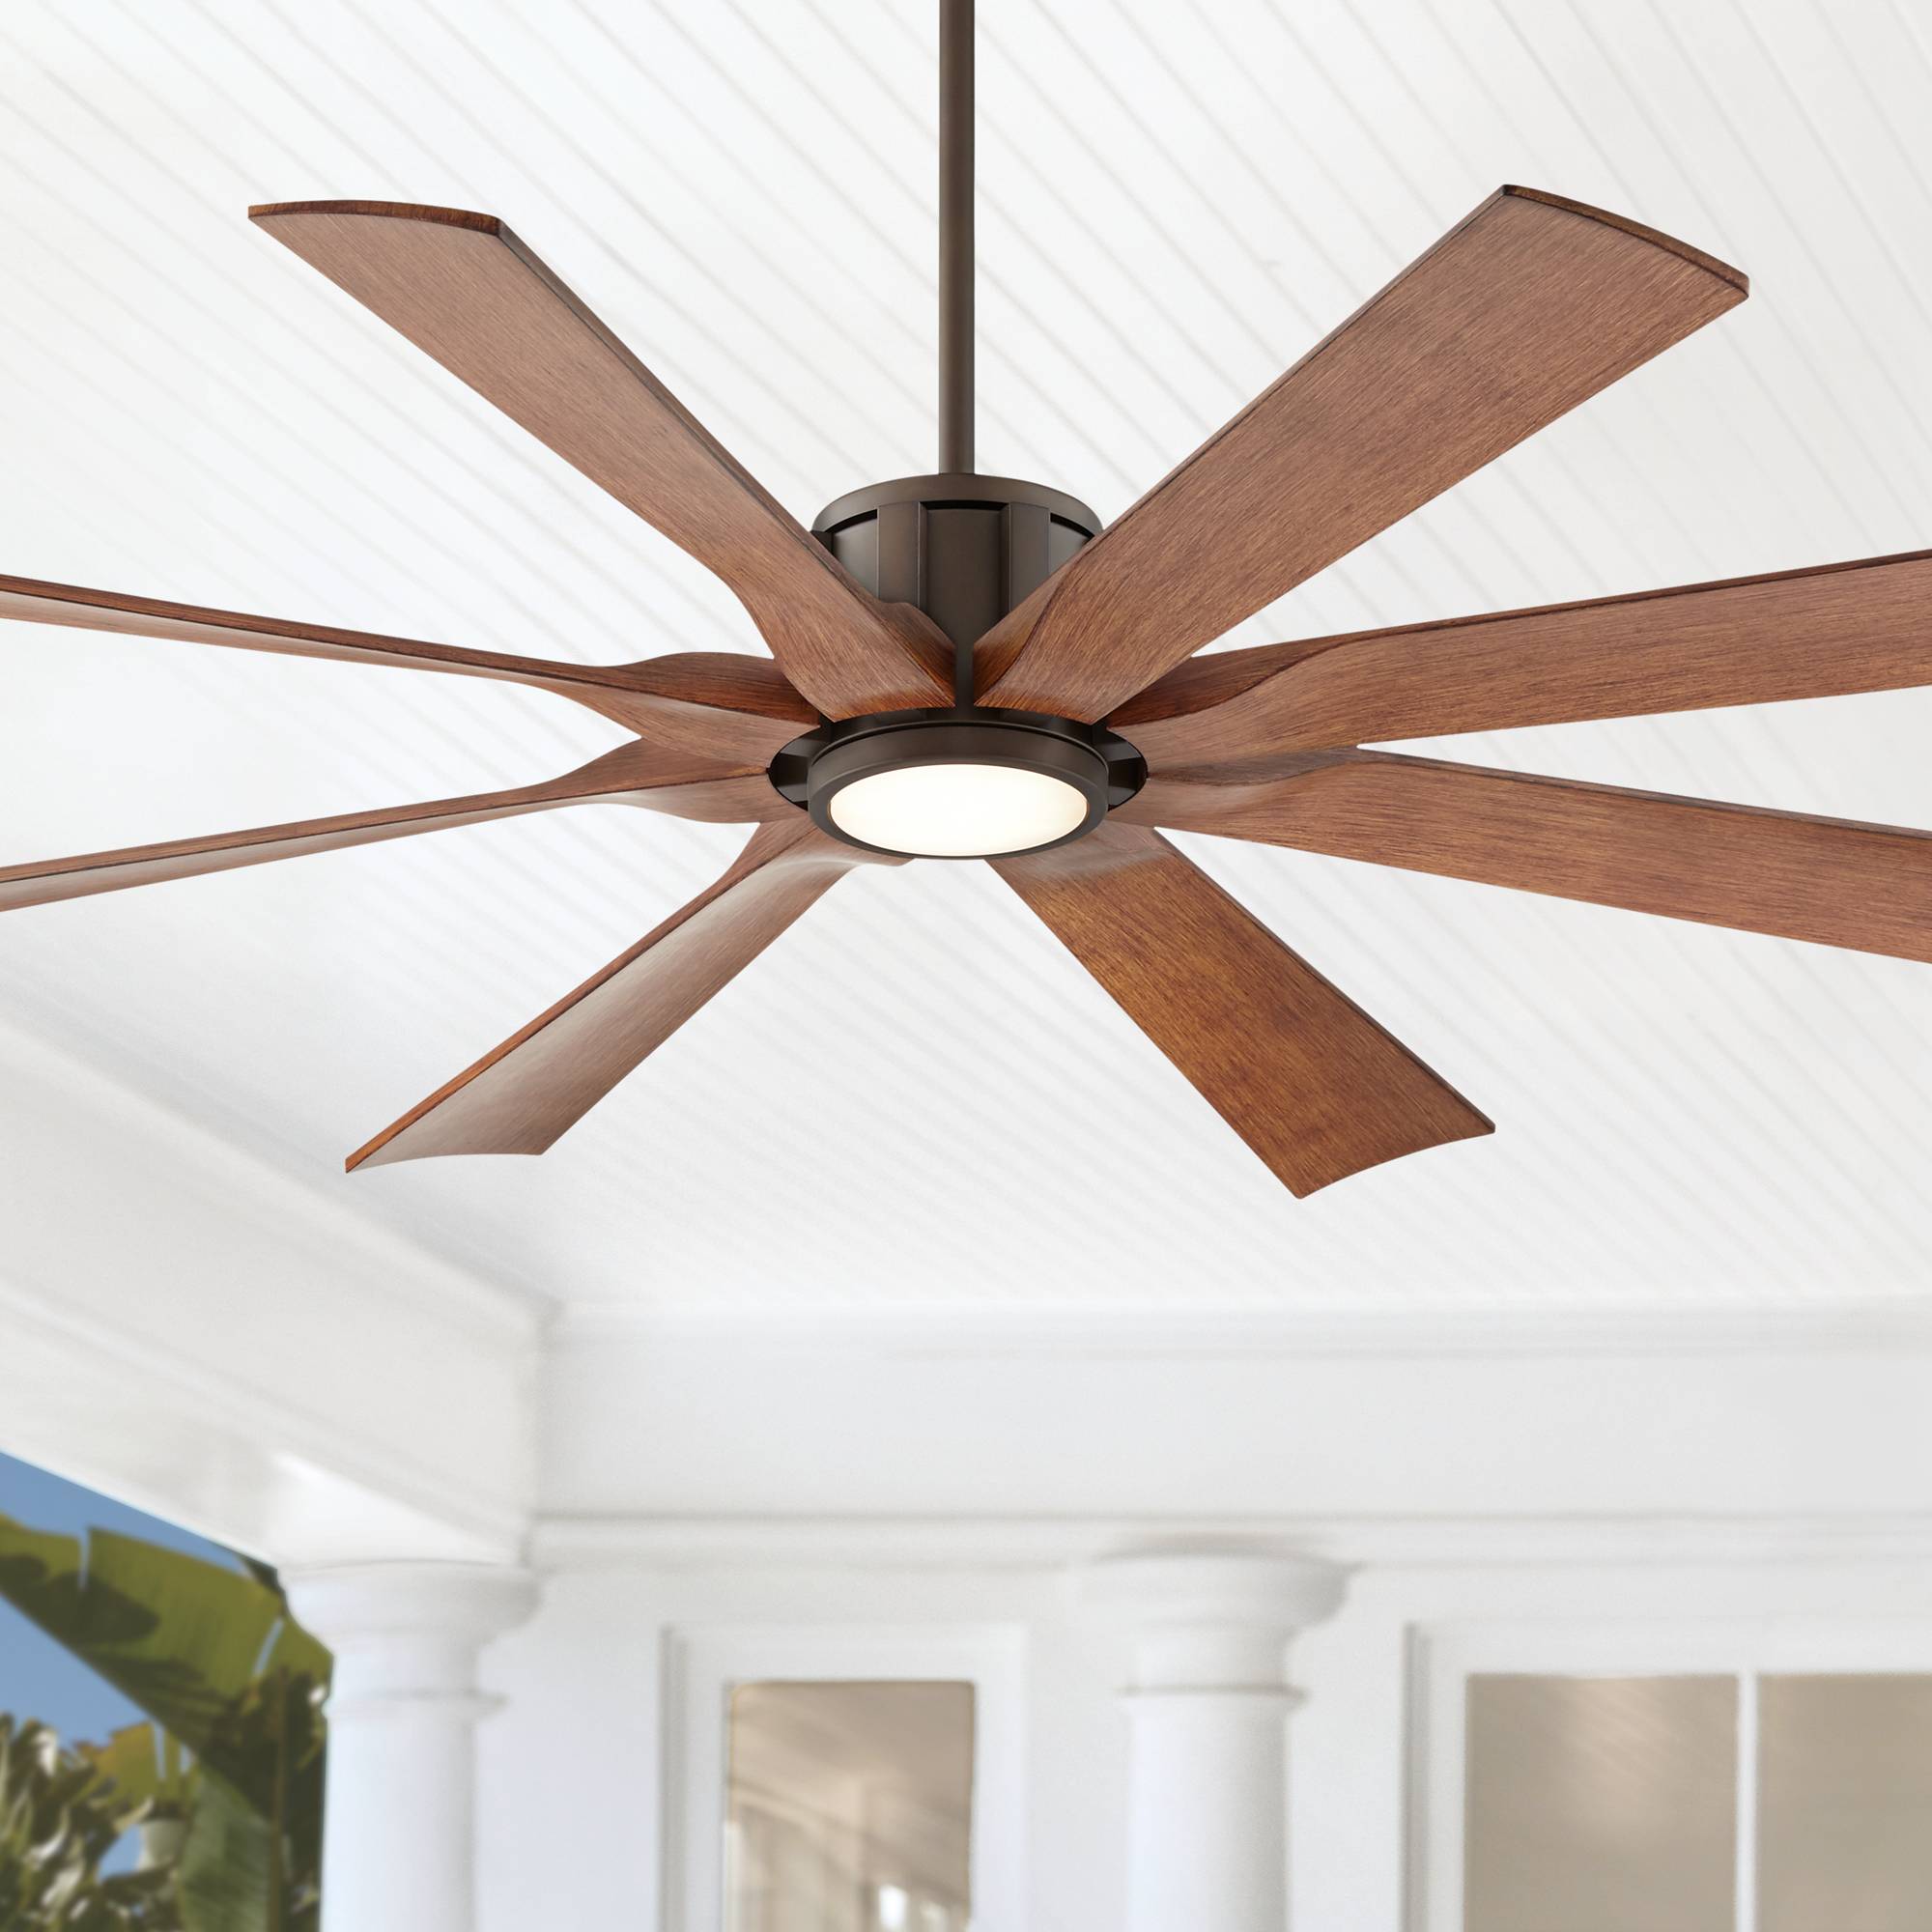 Ceiling Fans With Downrod - www.inf-inet.com